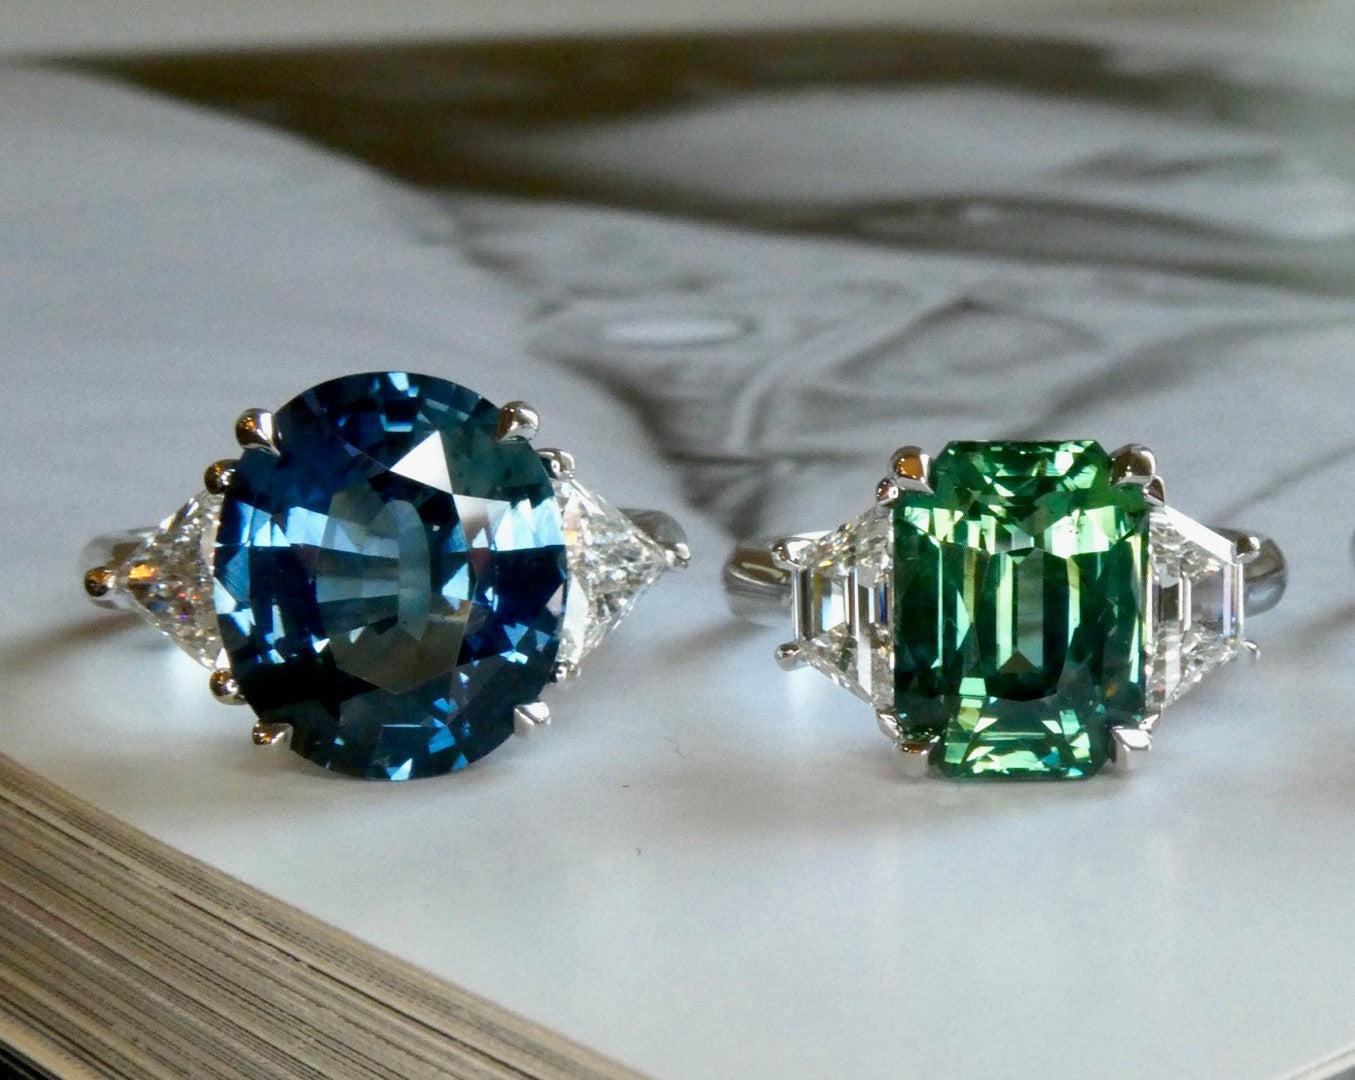 New sapphire and platinum engagement rings by Dana Walden Bridal